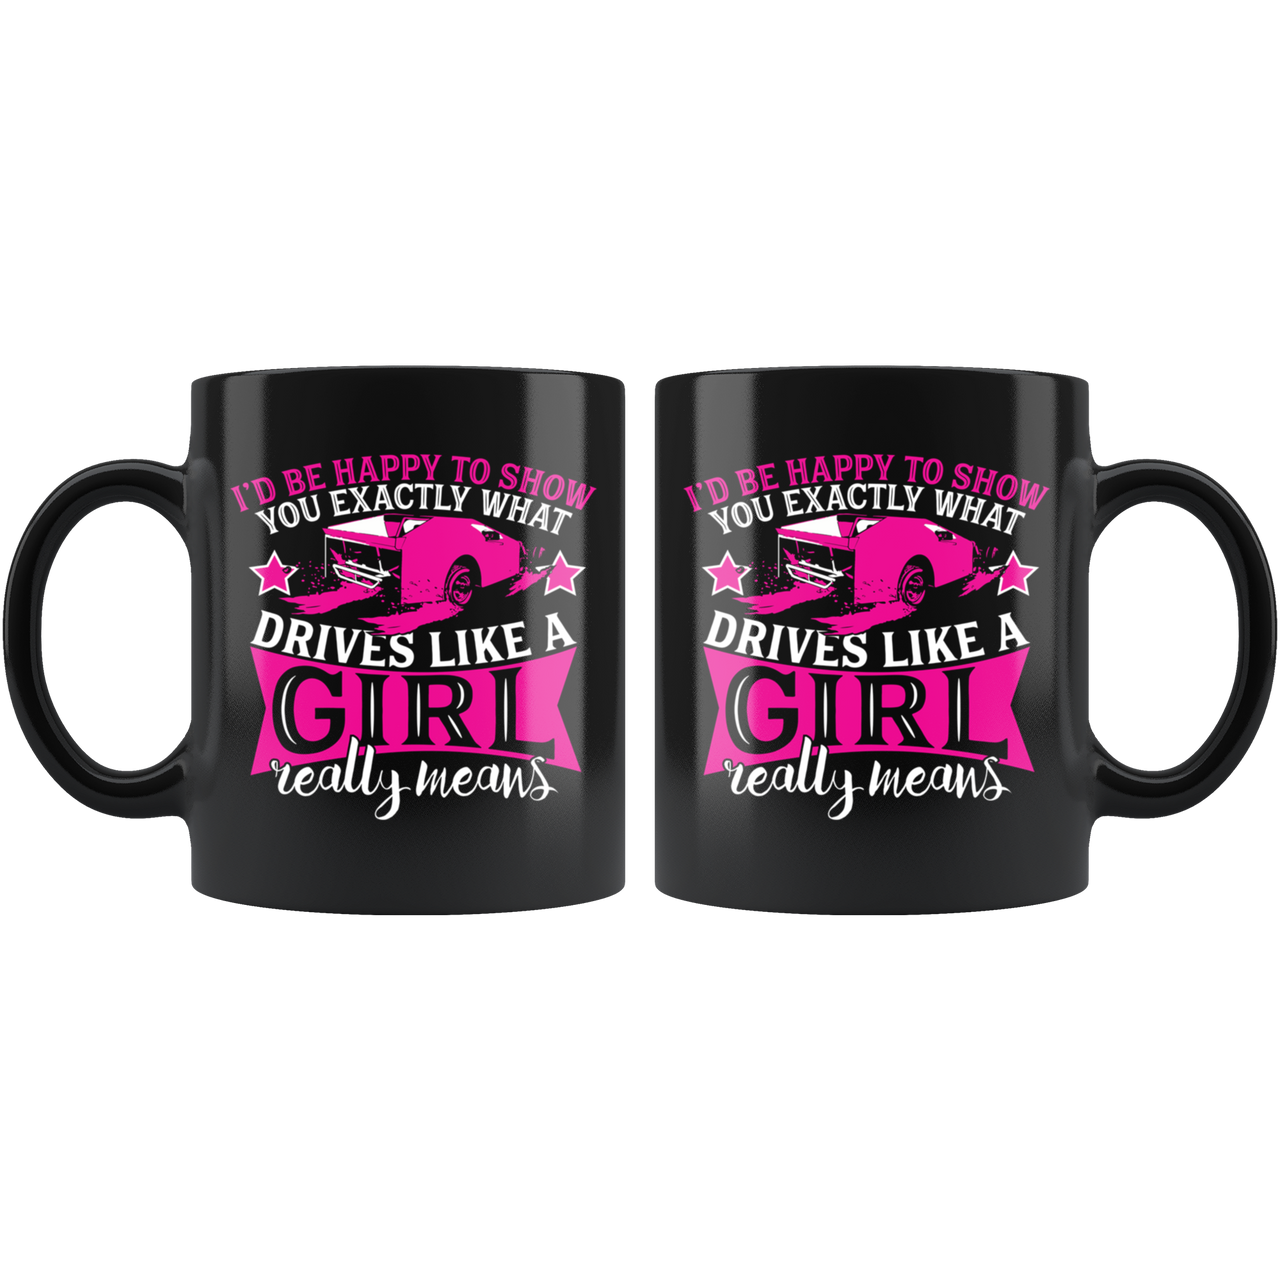 I'd Happy To Show You What Drives Like A Girl Really Means Late Model Mug!